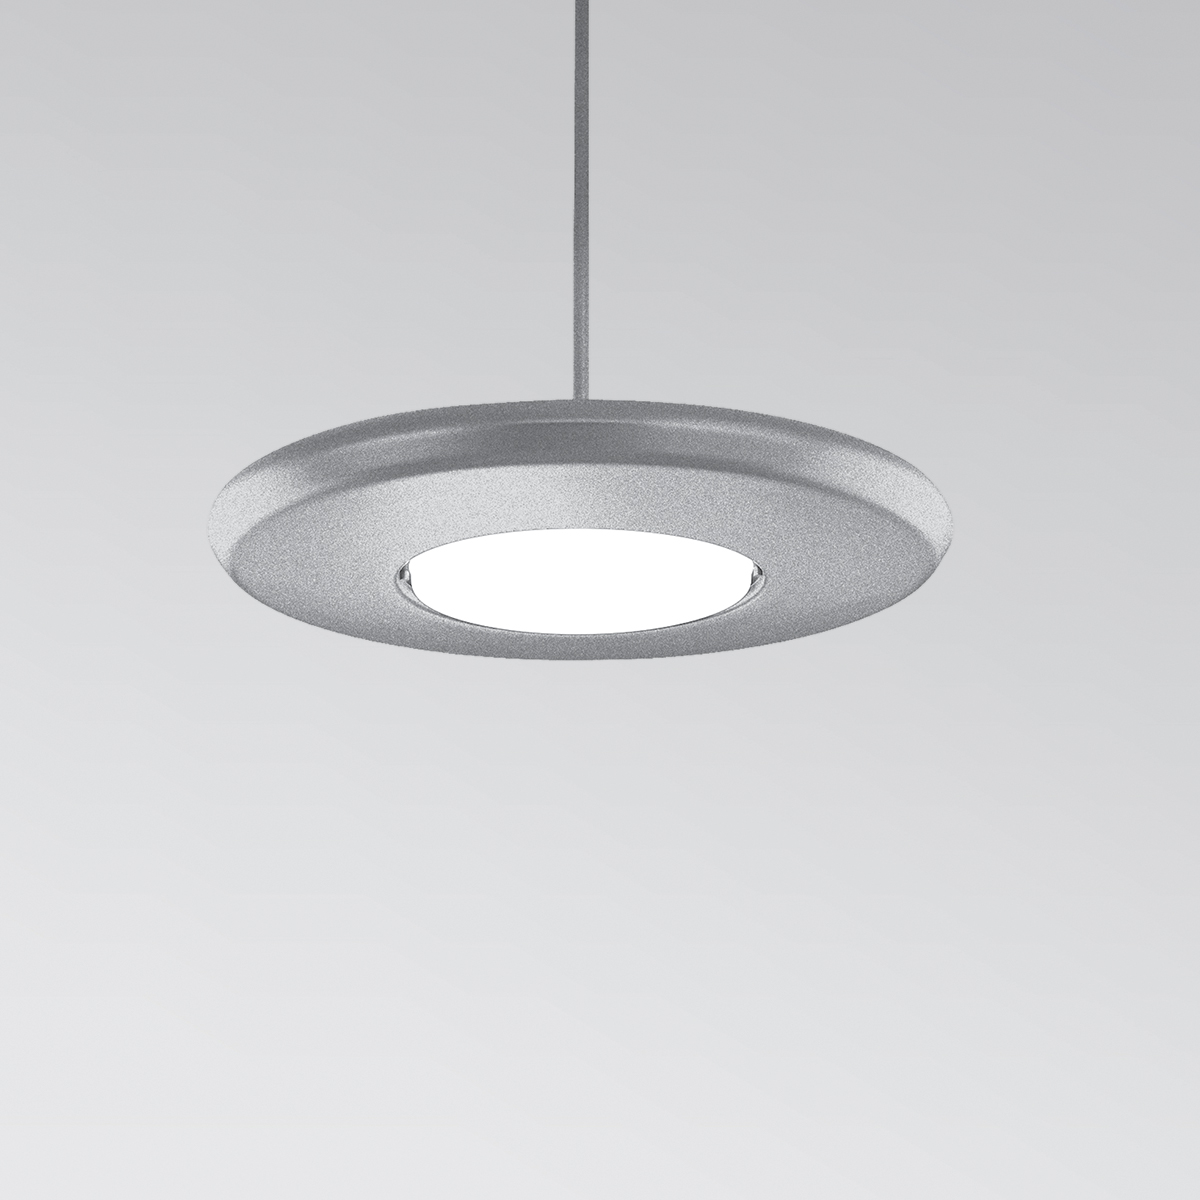 CP4452 Aries A round, disc-shaped pendant with a luminous downlight diffuser in the center